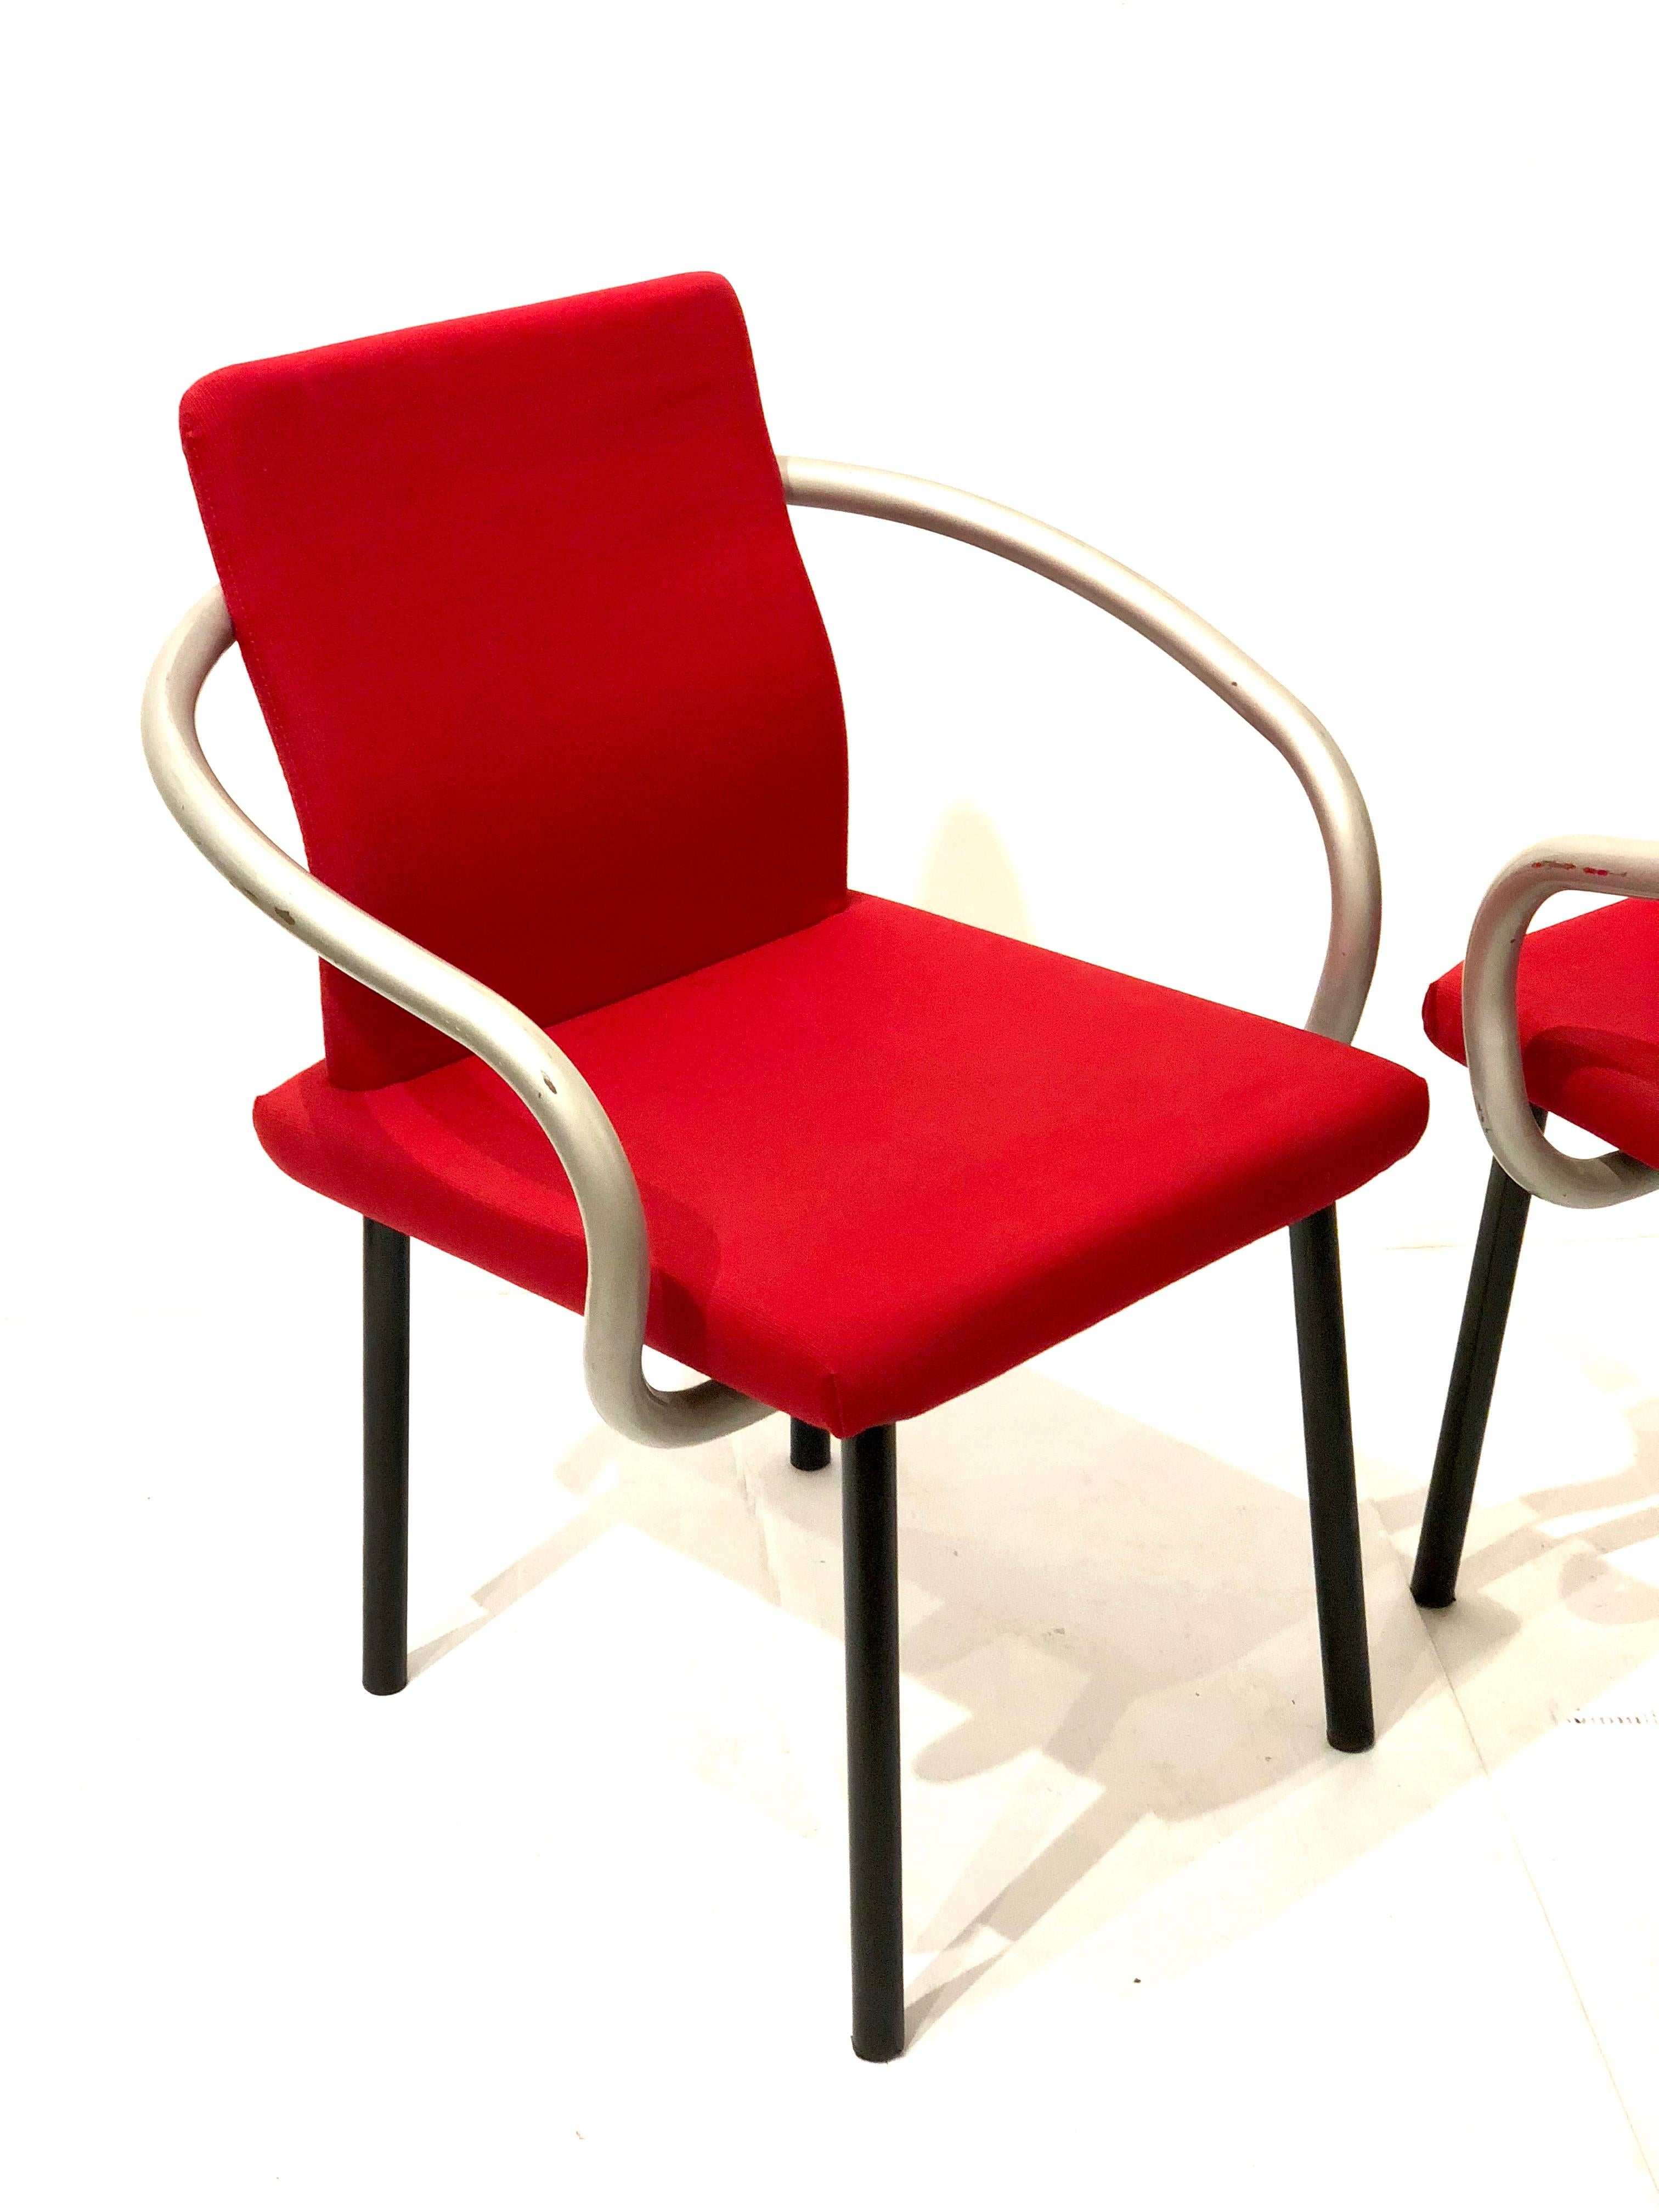 Nice set of four Mandarin chairs designed by Sottsass for Knoll, in red fabric on foam black enameled tubular legs and silver pipping arms, simple and elegant by this master architect.